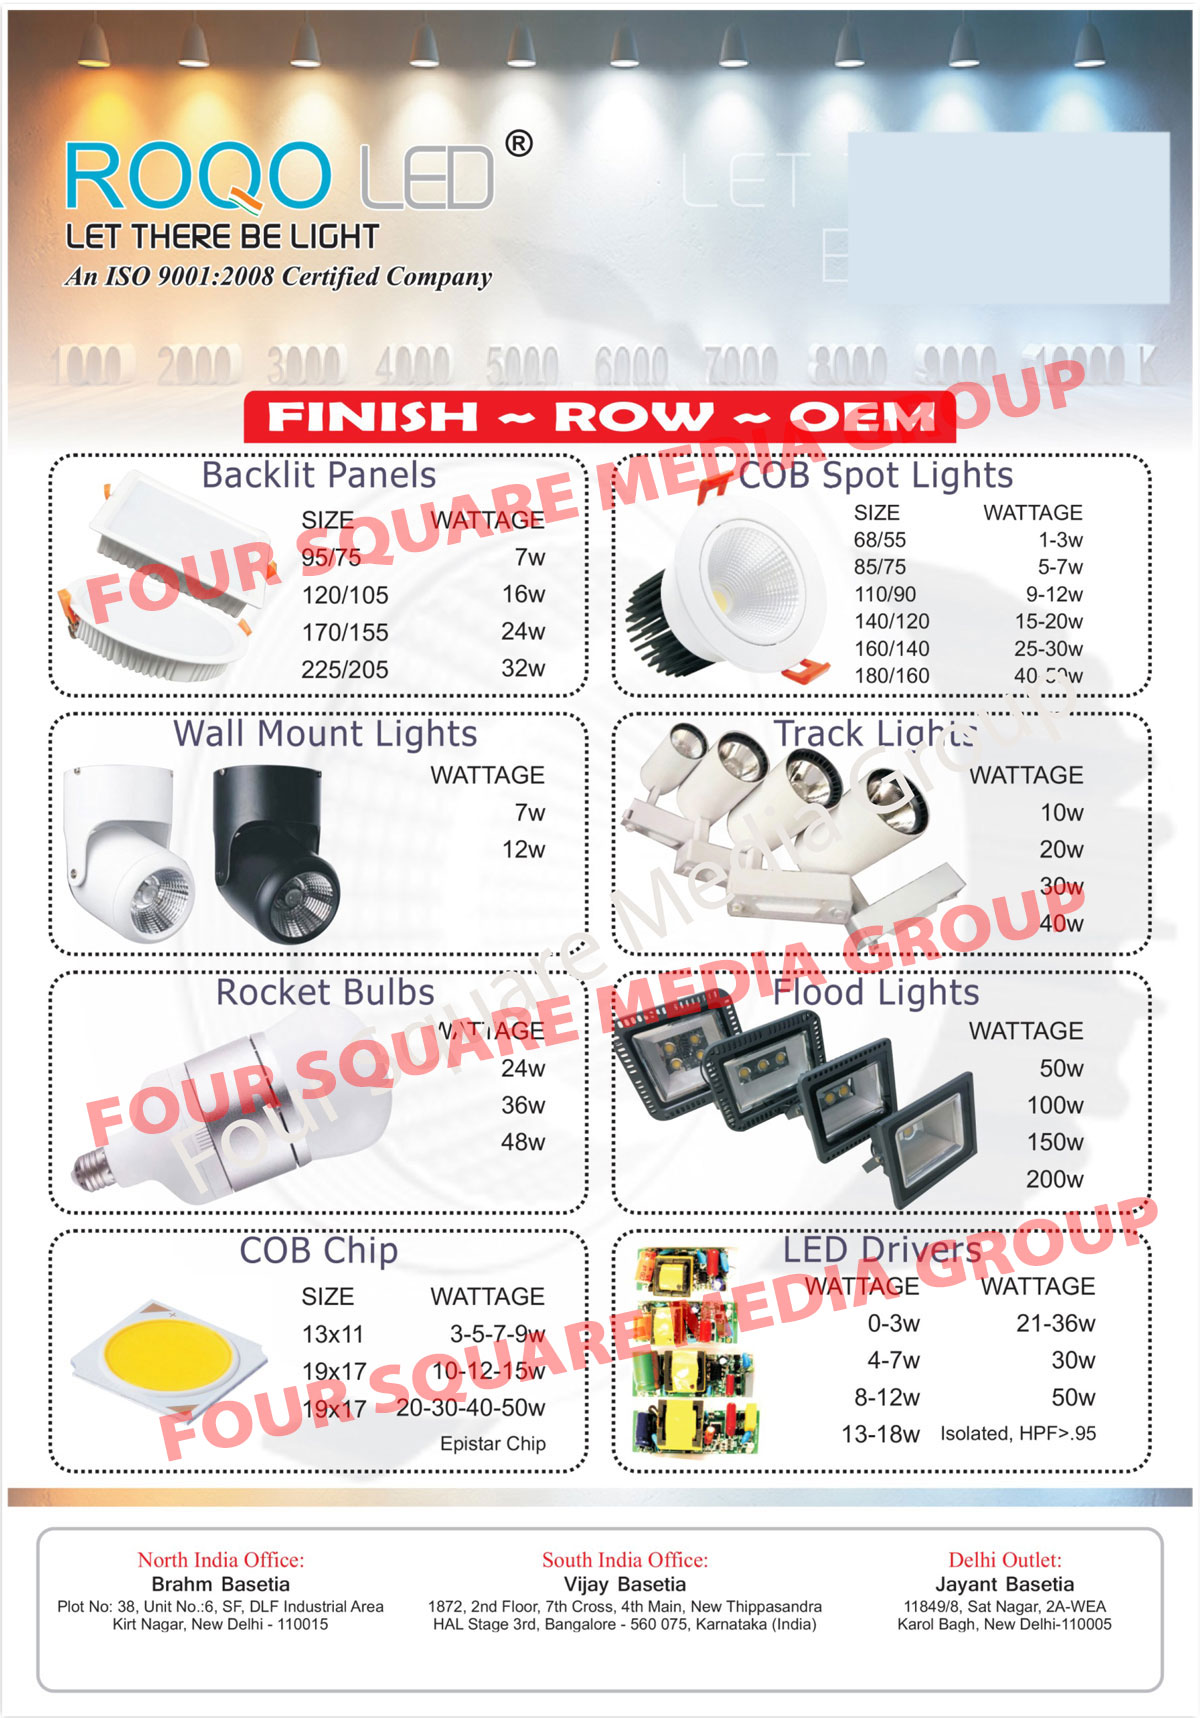 Led Lights, Led Panel Lights, Led Down Lights, Led Bulbs, Led Drivers, Led Isolated HPF Drivers, Led Driver Cabinets with Air Windows, Led Raw Materials, Led Equipments, Led Modules, Backlit Panels, COB Spot Lights, Wall Mount Lights, Track Lights, Rocket Bulbs, Flood Lights, COB Chips